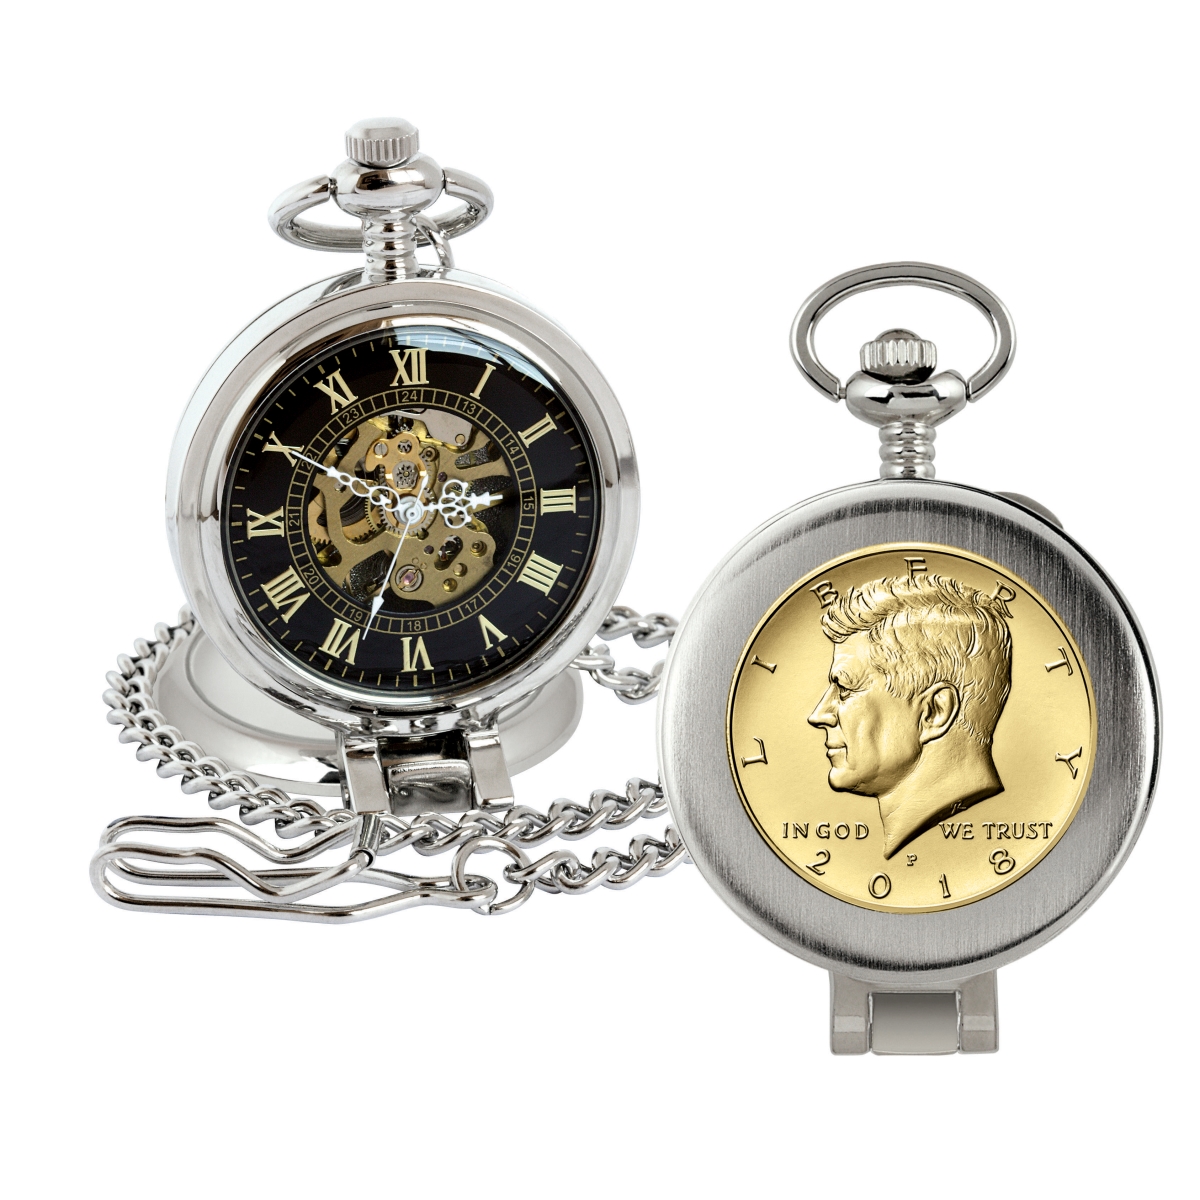 Picture of American Coin Treasures 16274 Gold-Layered JFK Half Dollar Coin Pocket Watch with Skeleton Movement, Black Dial with Gold Roman Numerals - Magnifying Glass